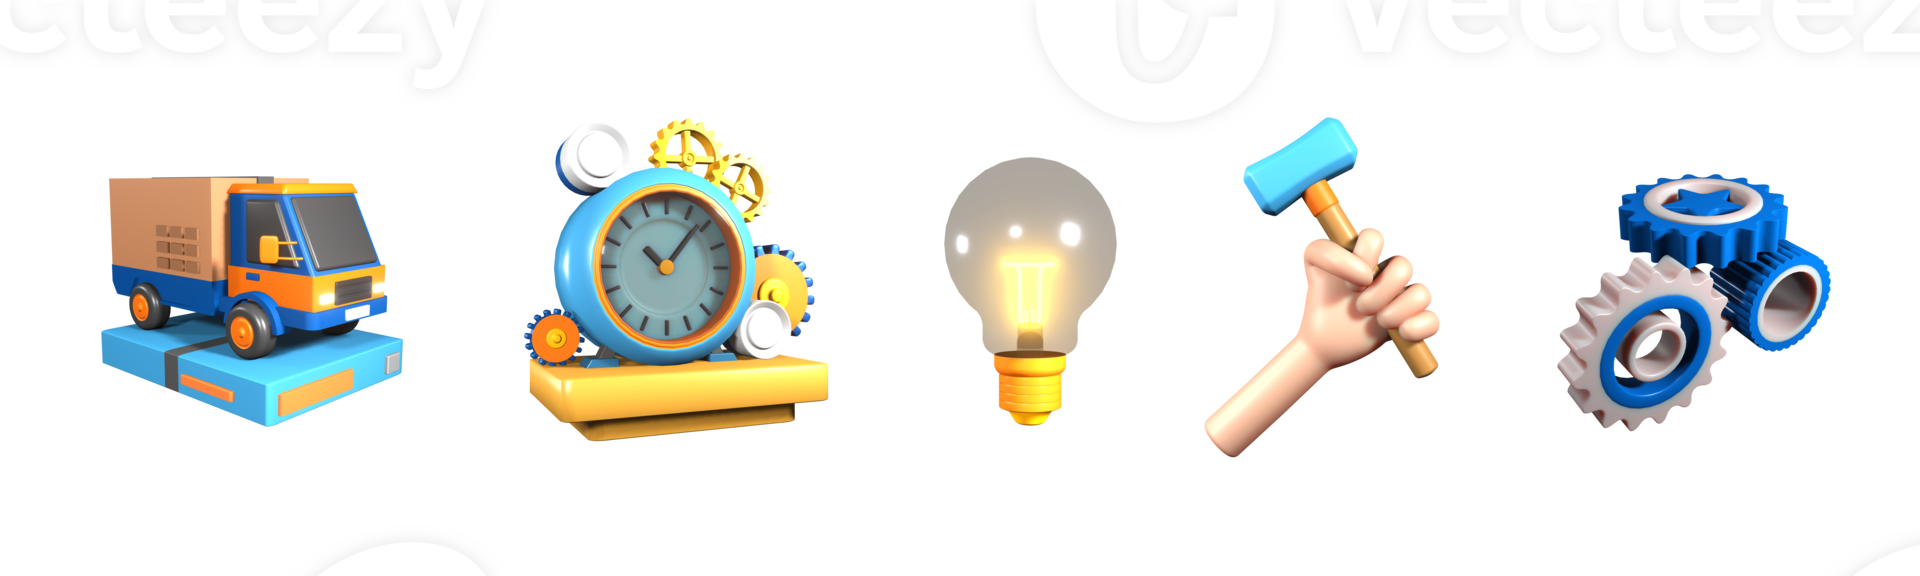 3D icon labor day collection rendered isolated on the transparent background. delivery truck, factory clock, factory light bulb, hand holding hammer, and industrial gear object for your design. png